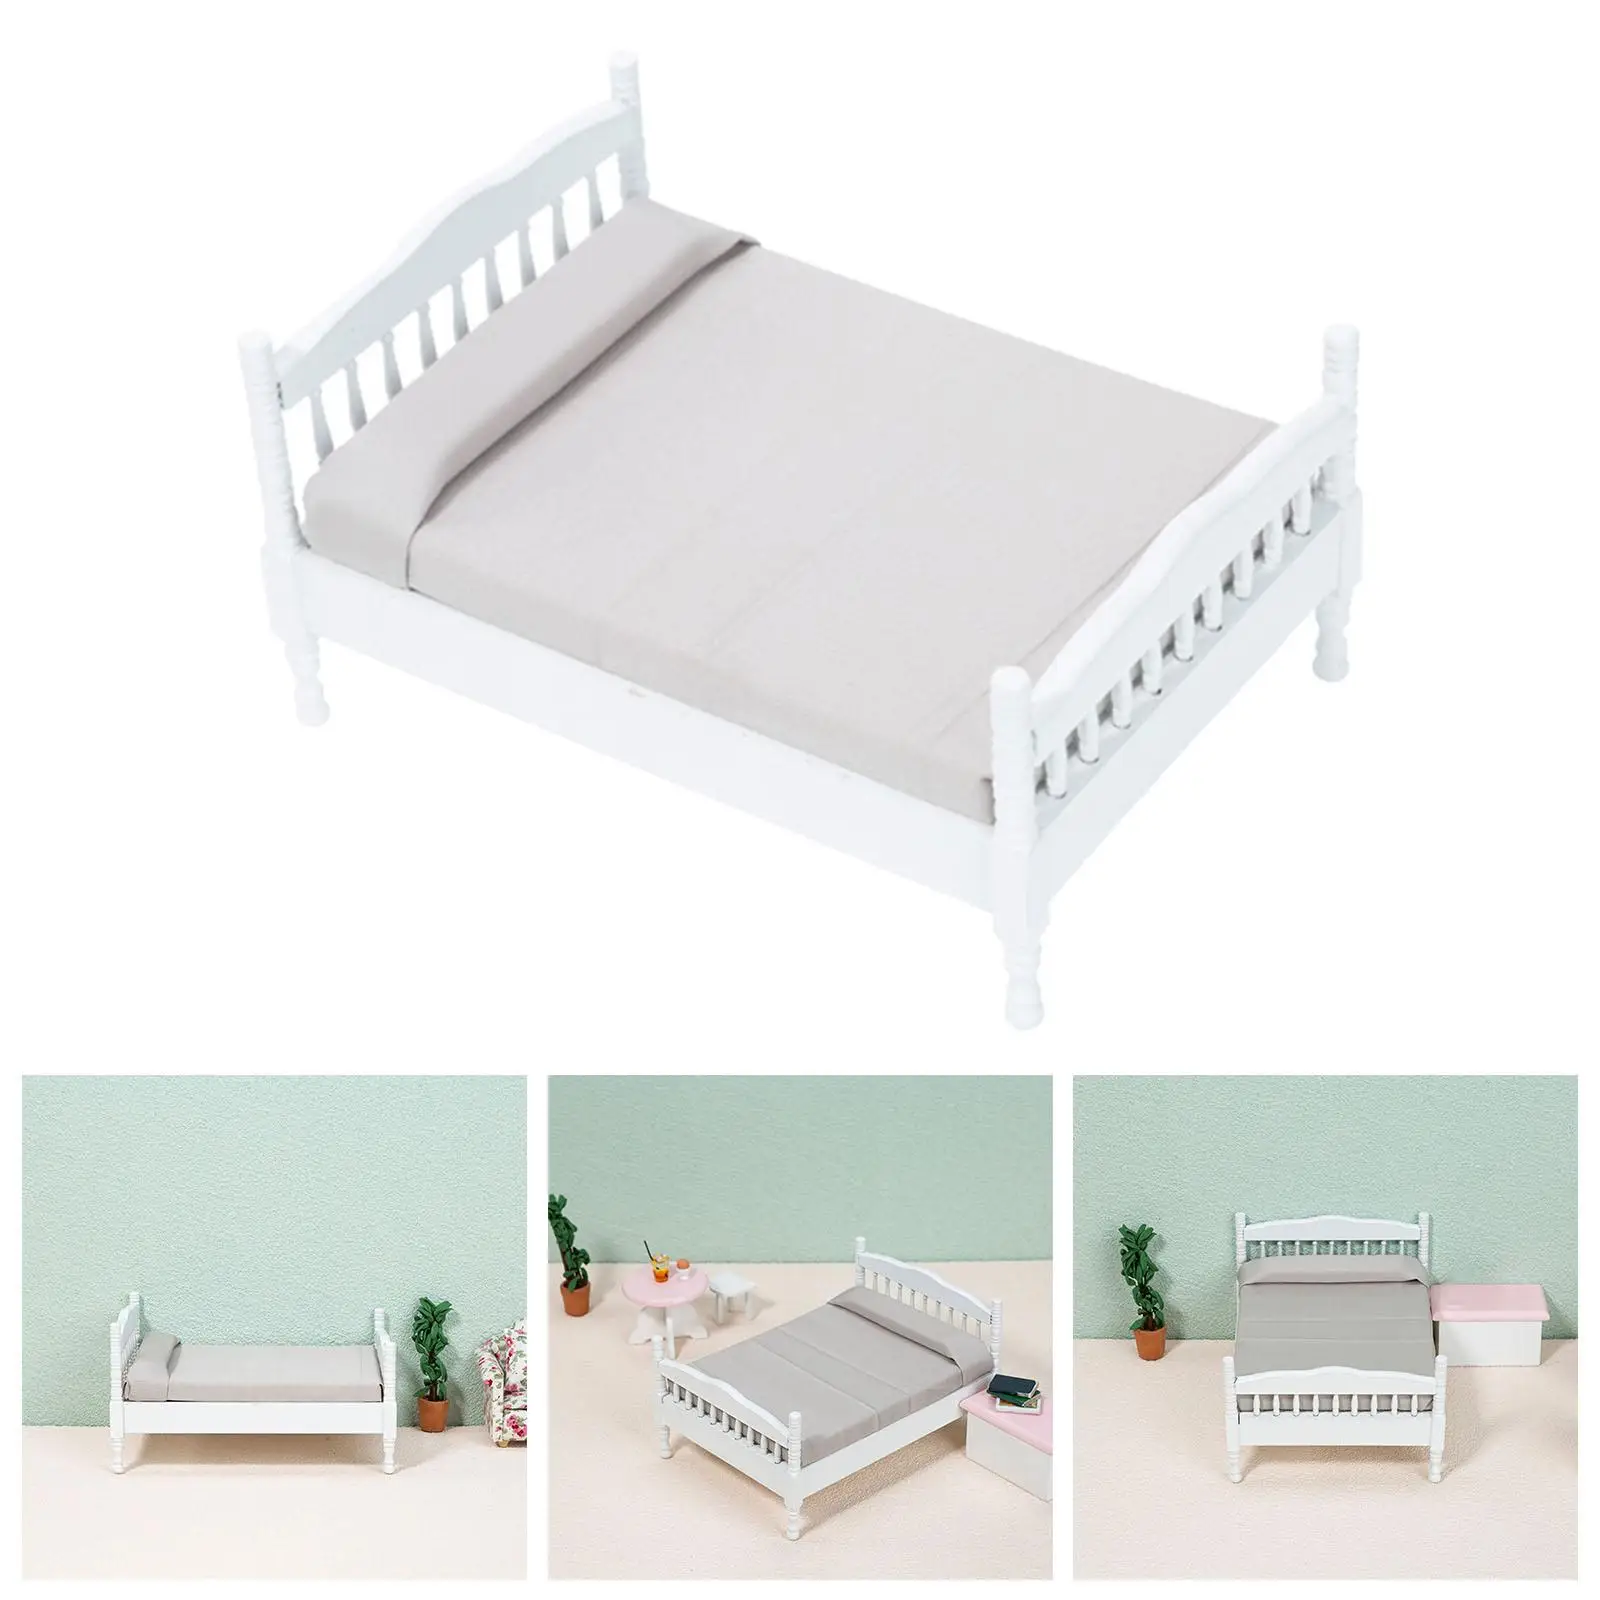 Handcrafted Miniature Dollhouse Bed Dollhouse Furniture Pretend Play Toy Wooden 1:12 Scale Double Bed for Doll House Lover Kids